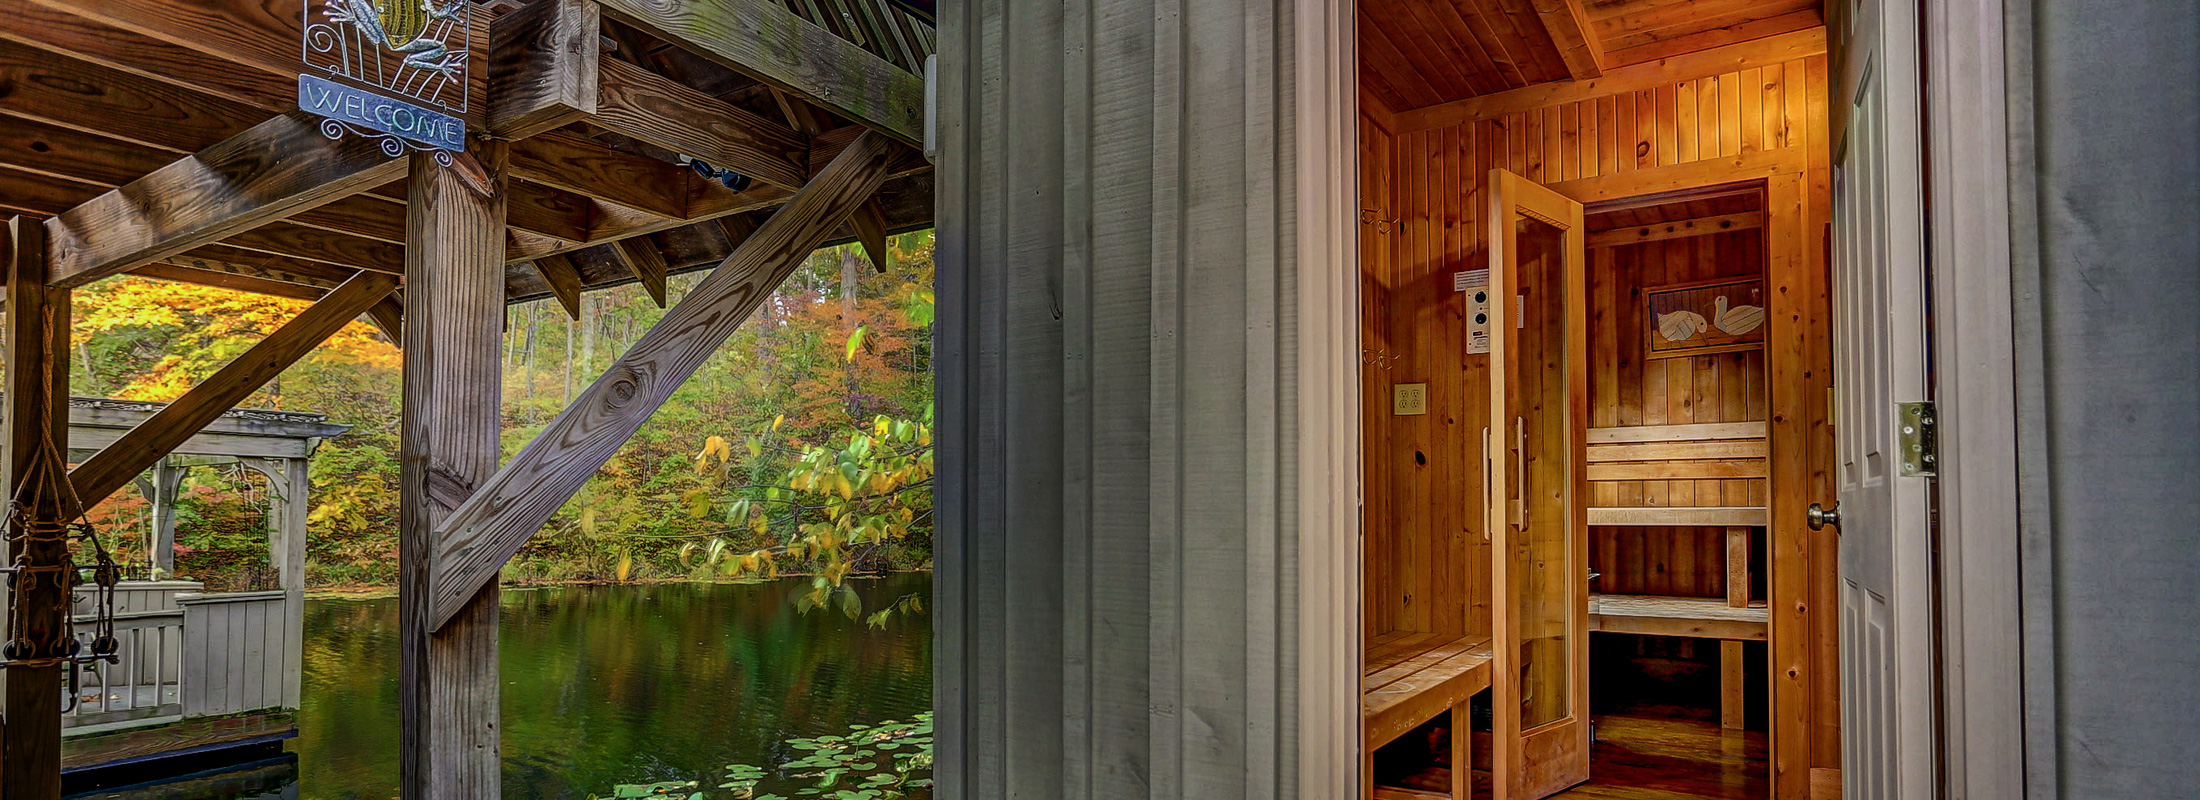 Pet Friendly Cabins - Two Cabins Perfect for you & your Furry Friends